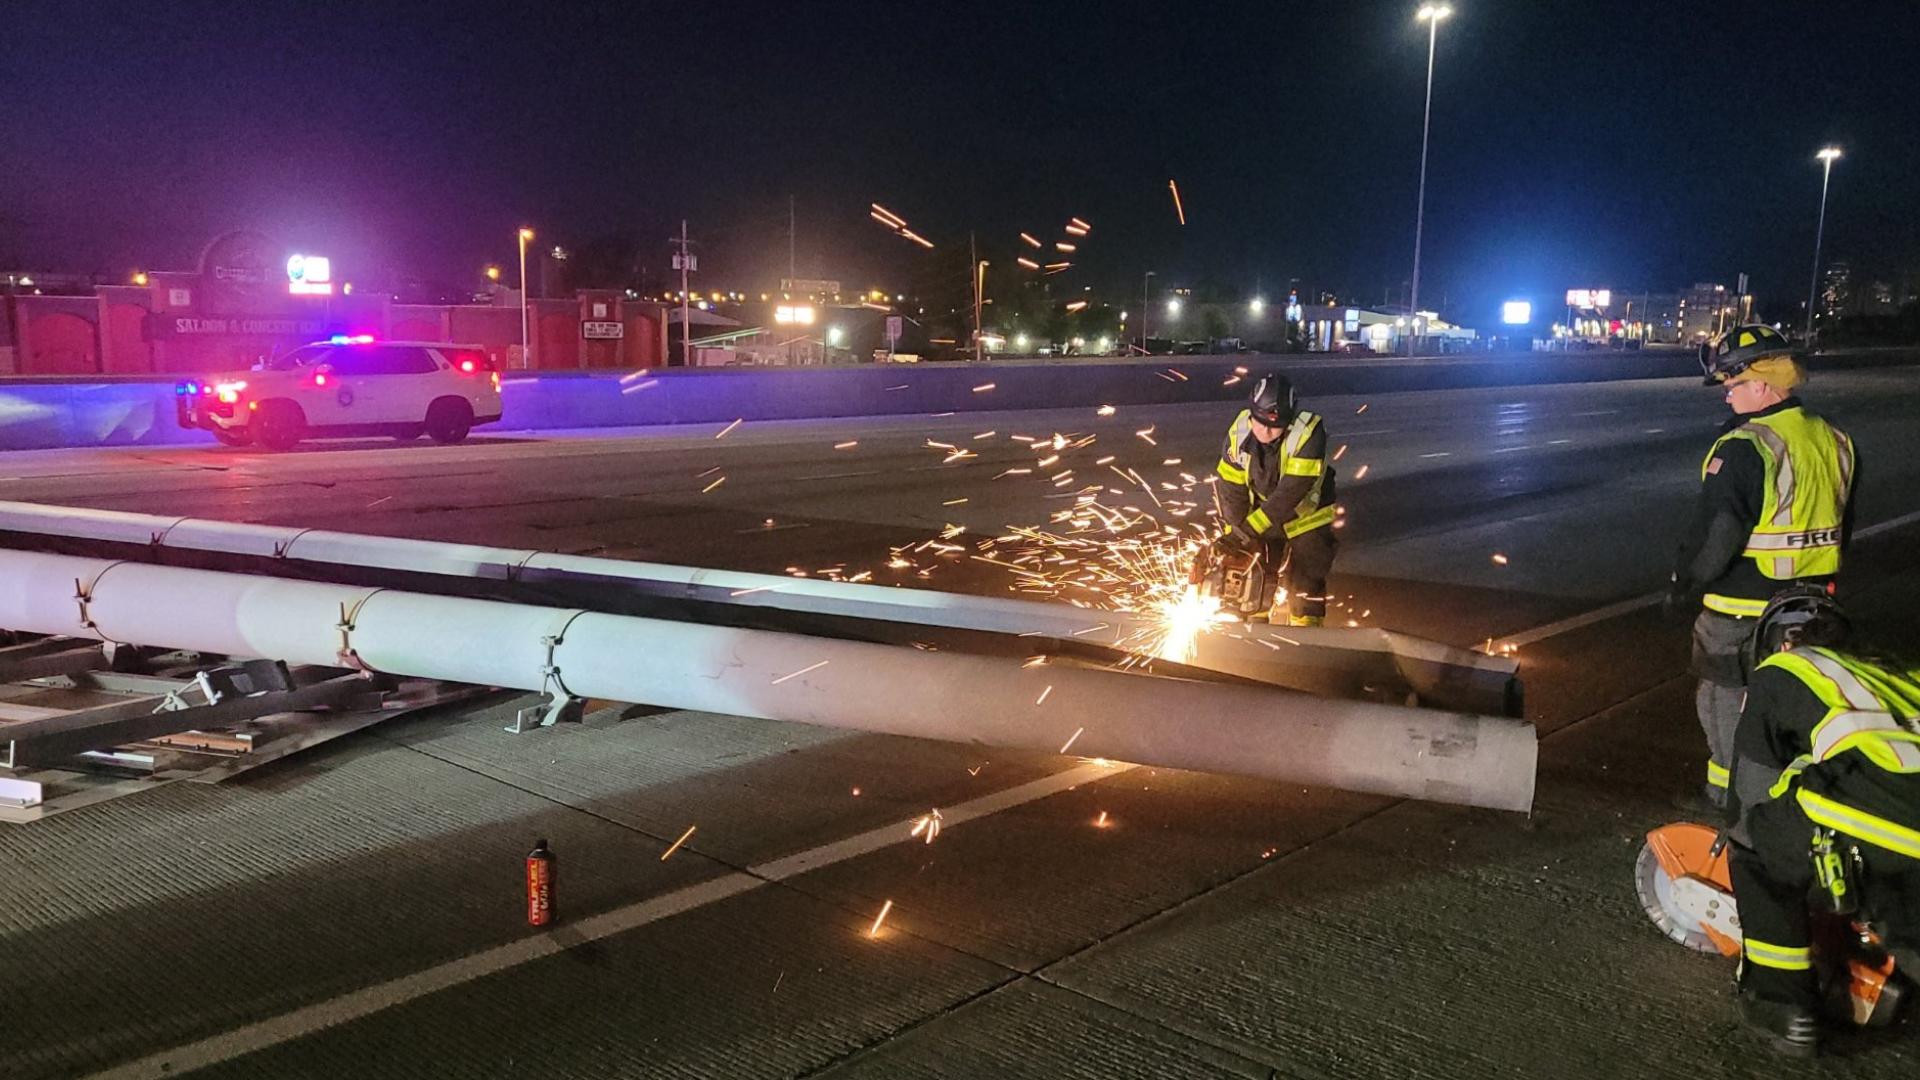 Southbound I-25 is closed at 58th Ave due to a downed sign post. Alternate routes are advised.